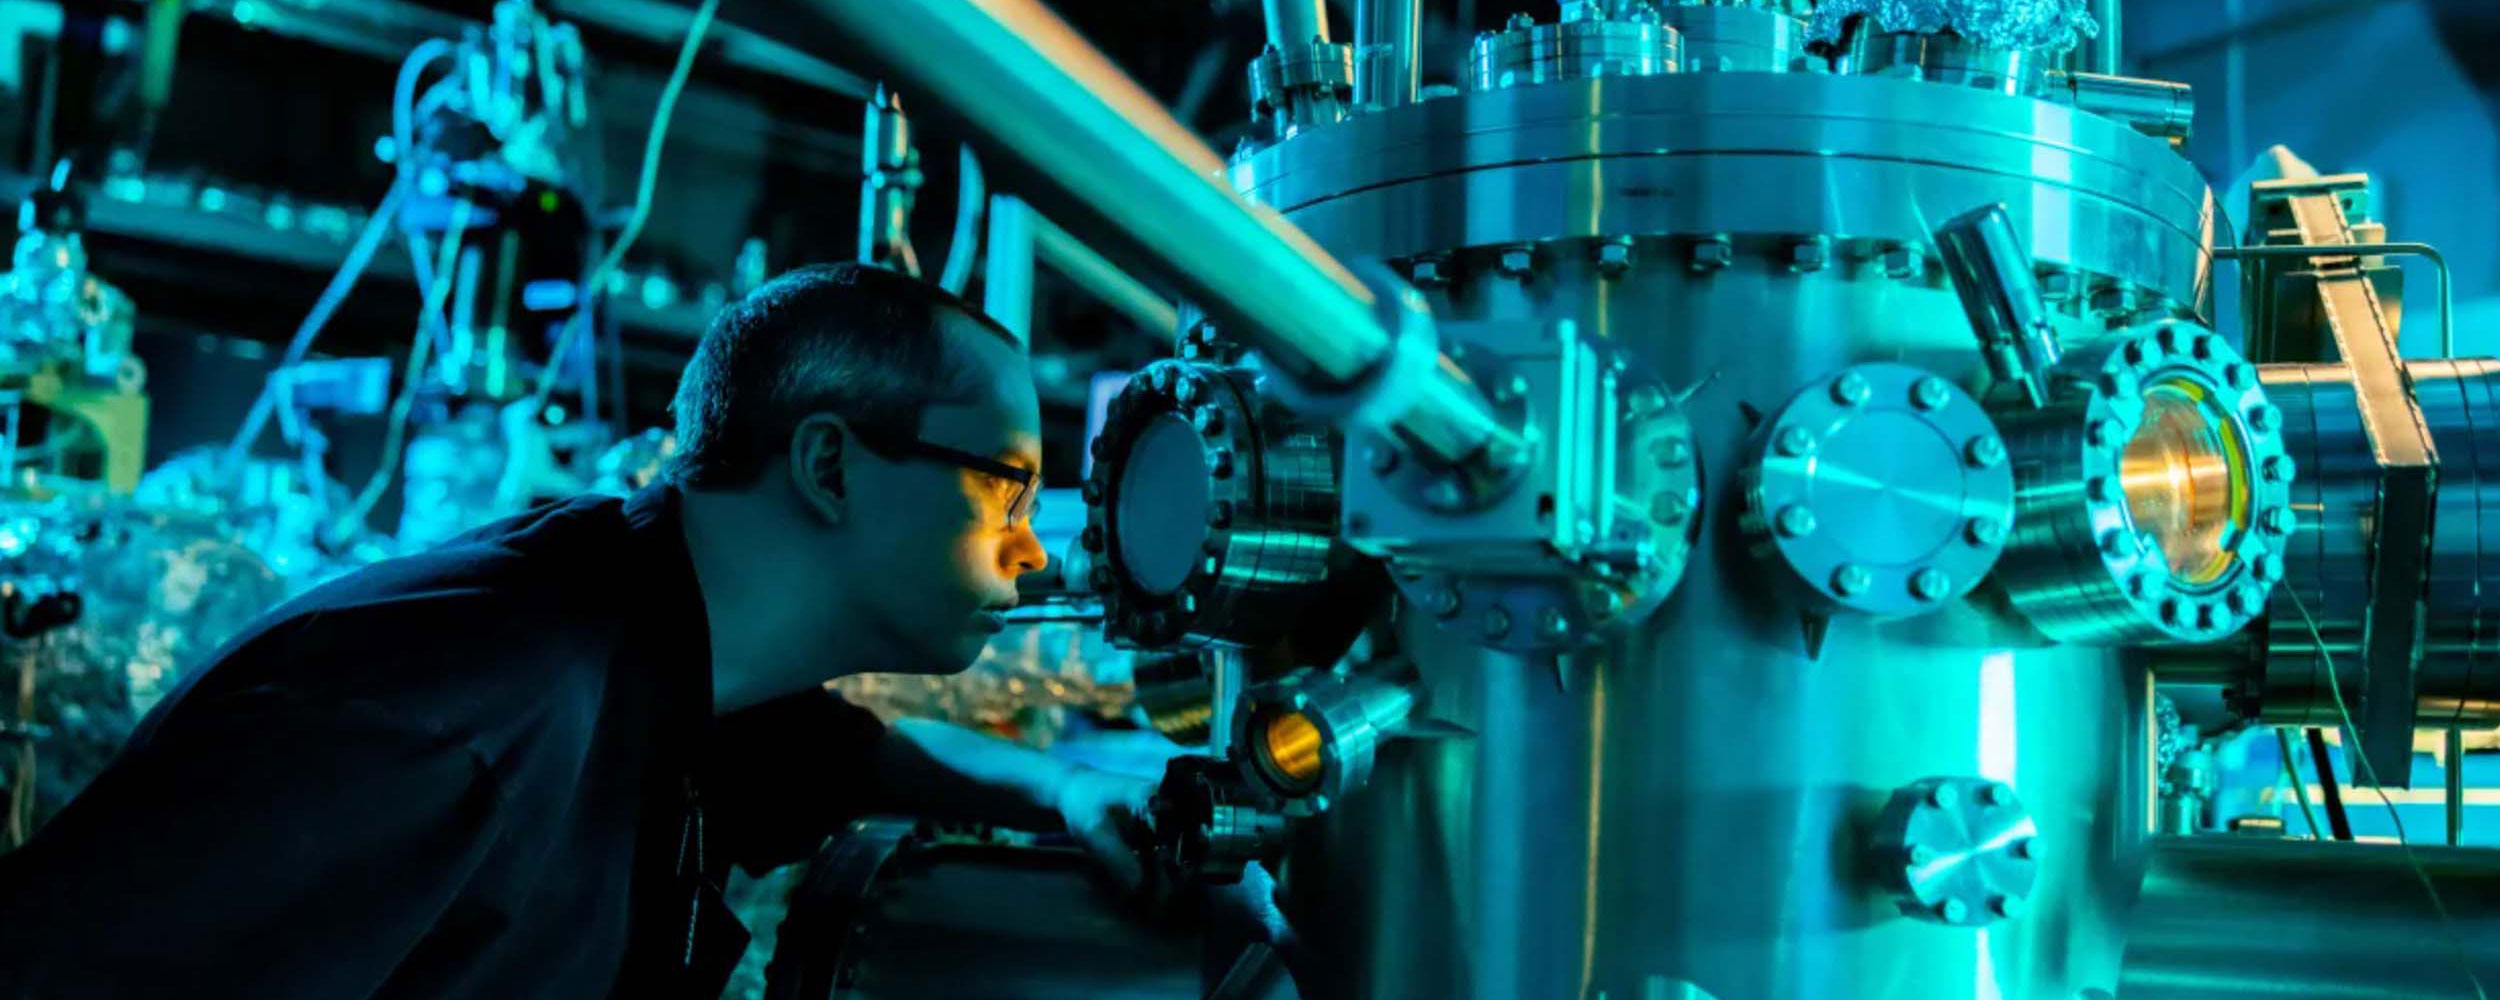 A graduate student works in the Molecular Beam Epitaxy Core Facility